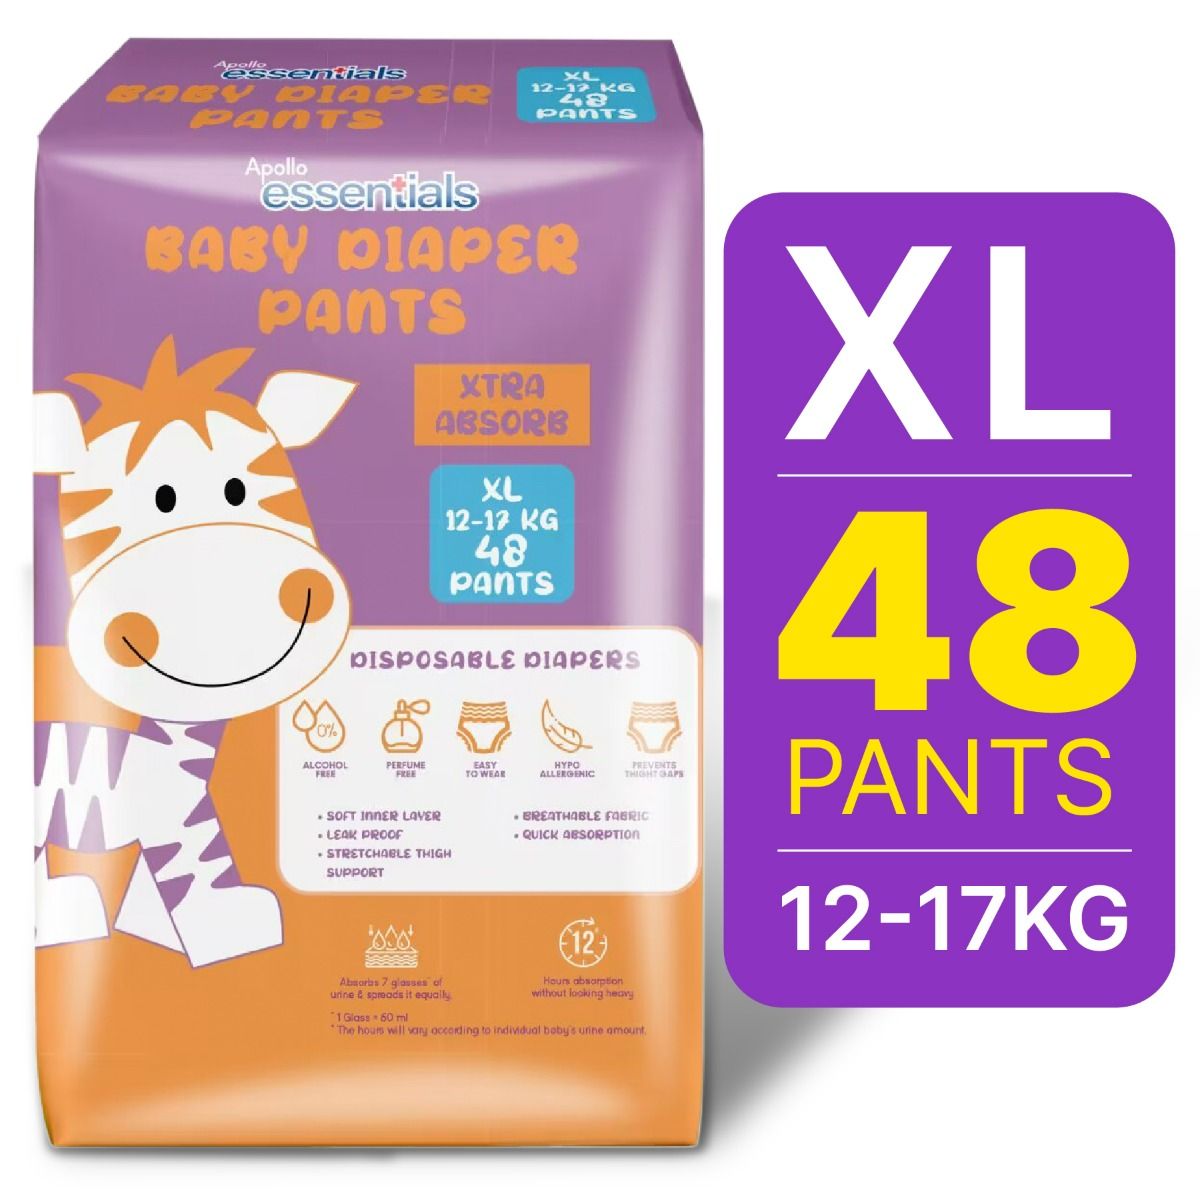 Apollo Essentials Extra Absorb Baby Diaper Pants XL, 48 Count Price, Uses,  Side Effects, Composition - Apollo Pharmacy